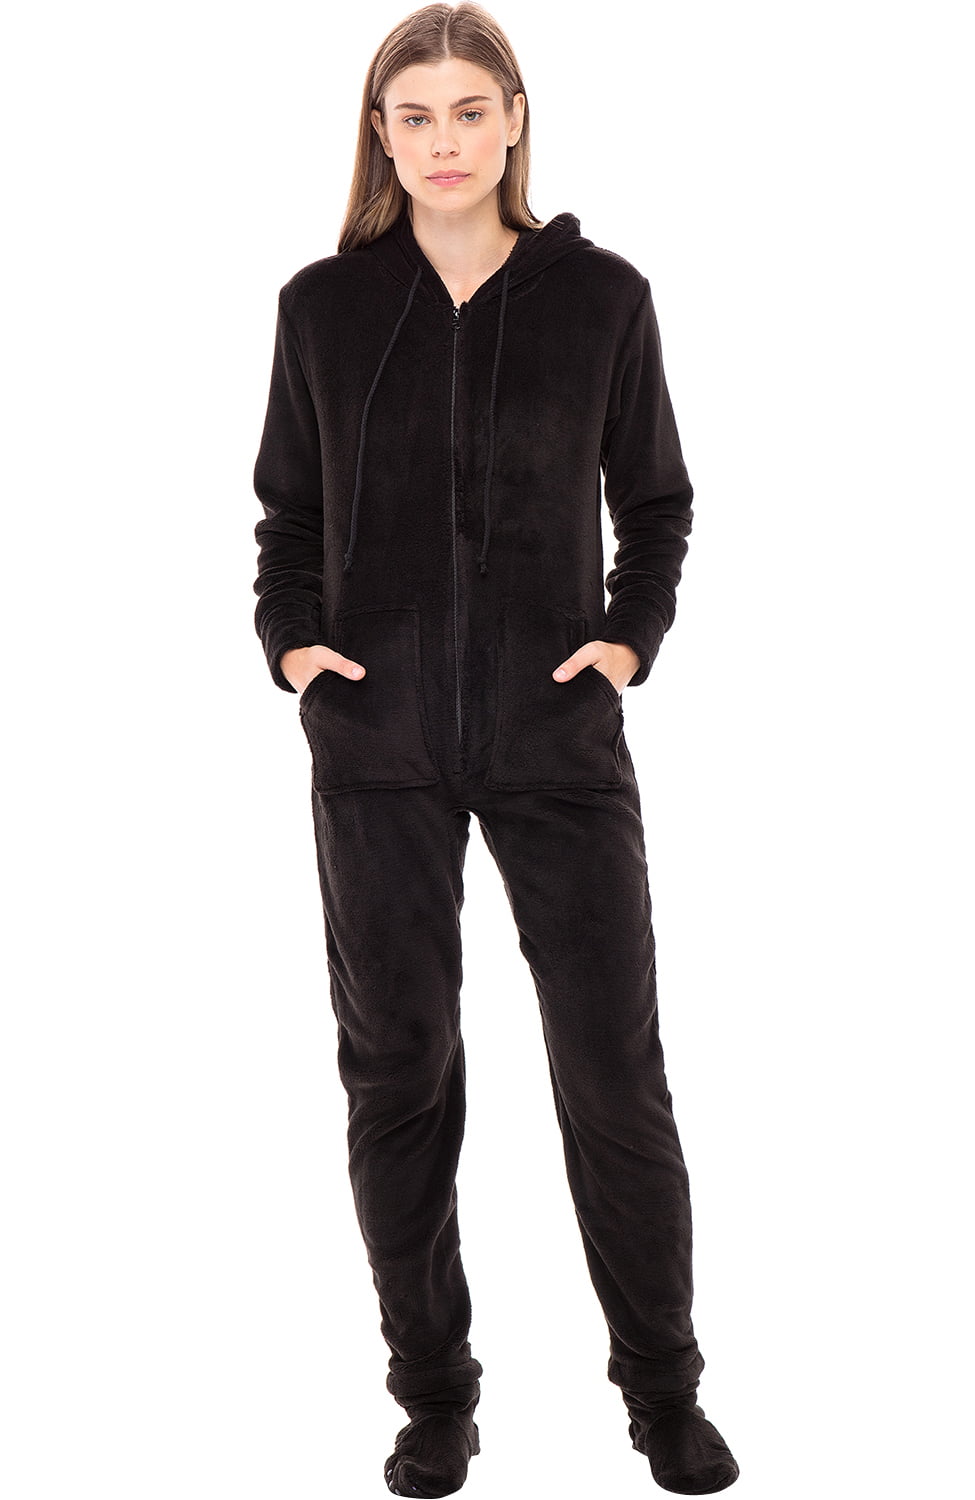 Winter Christm Details about   Alexander Del Rossa Women's Warm Fleece One Piece Footed Pajamas 